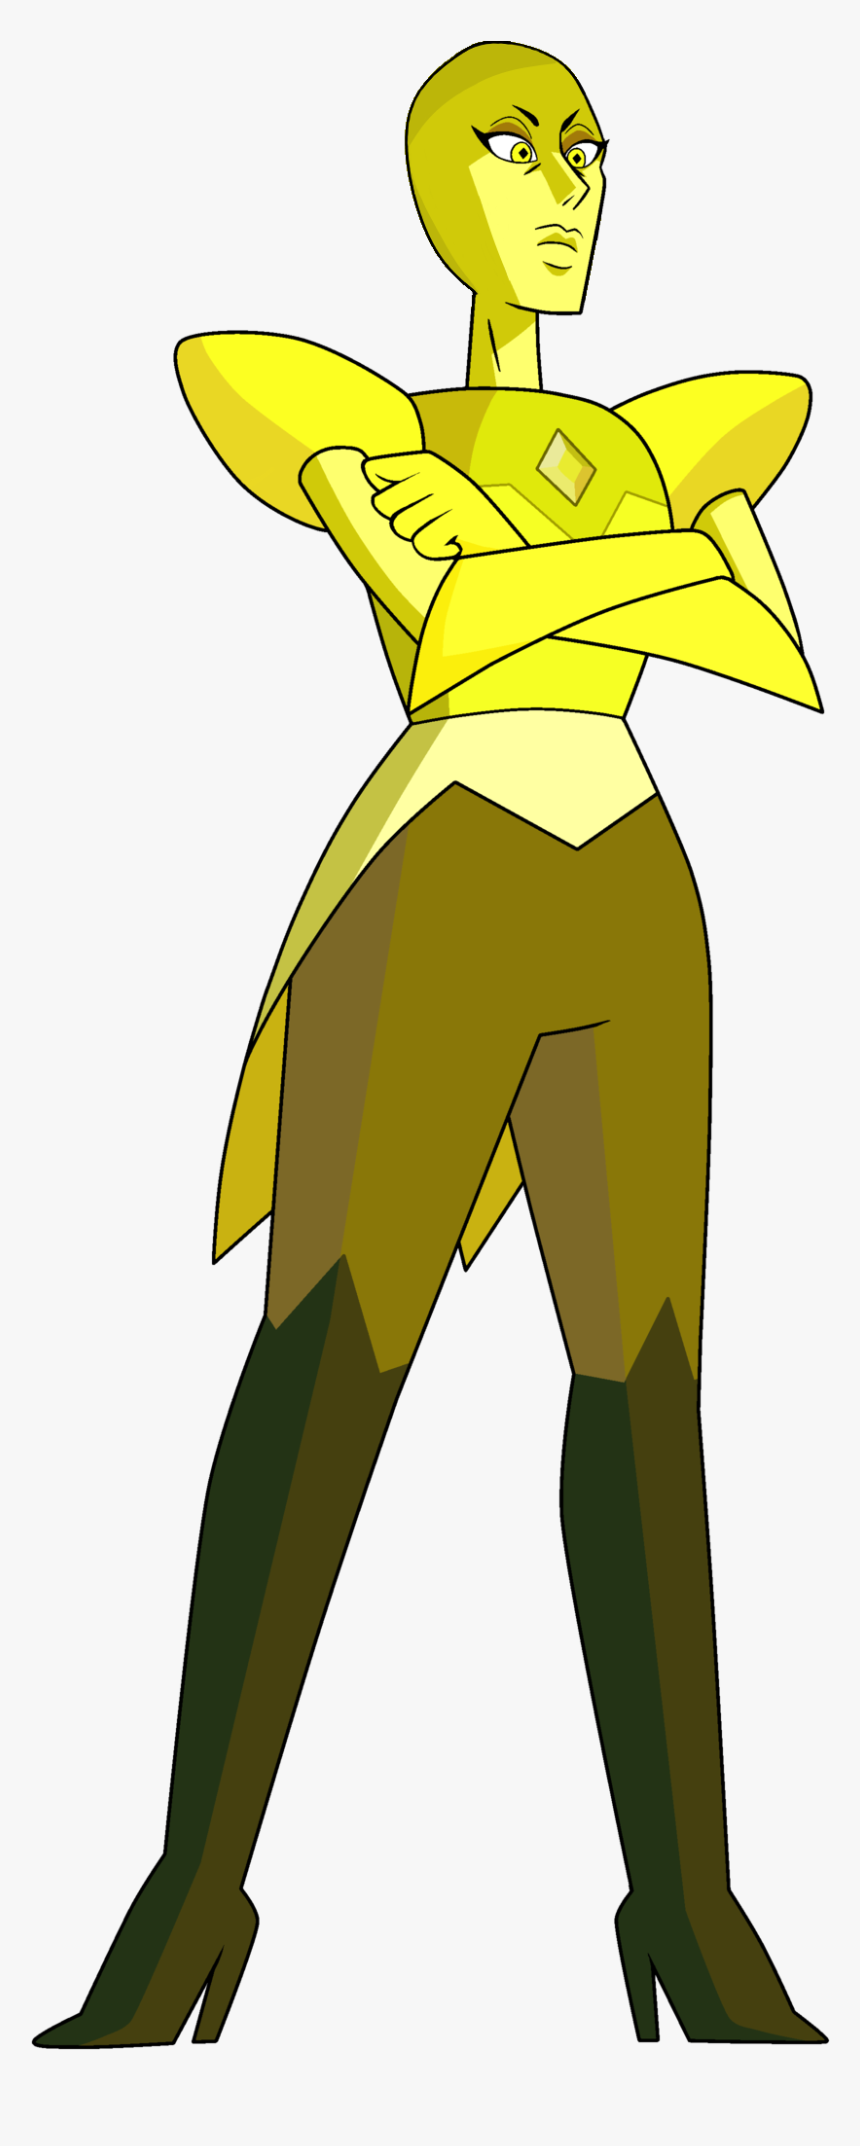 07, February 19, - Steven Universe Yellow Diamond Design, HD Png Download, Free Download